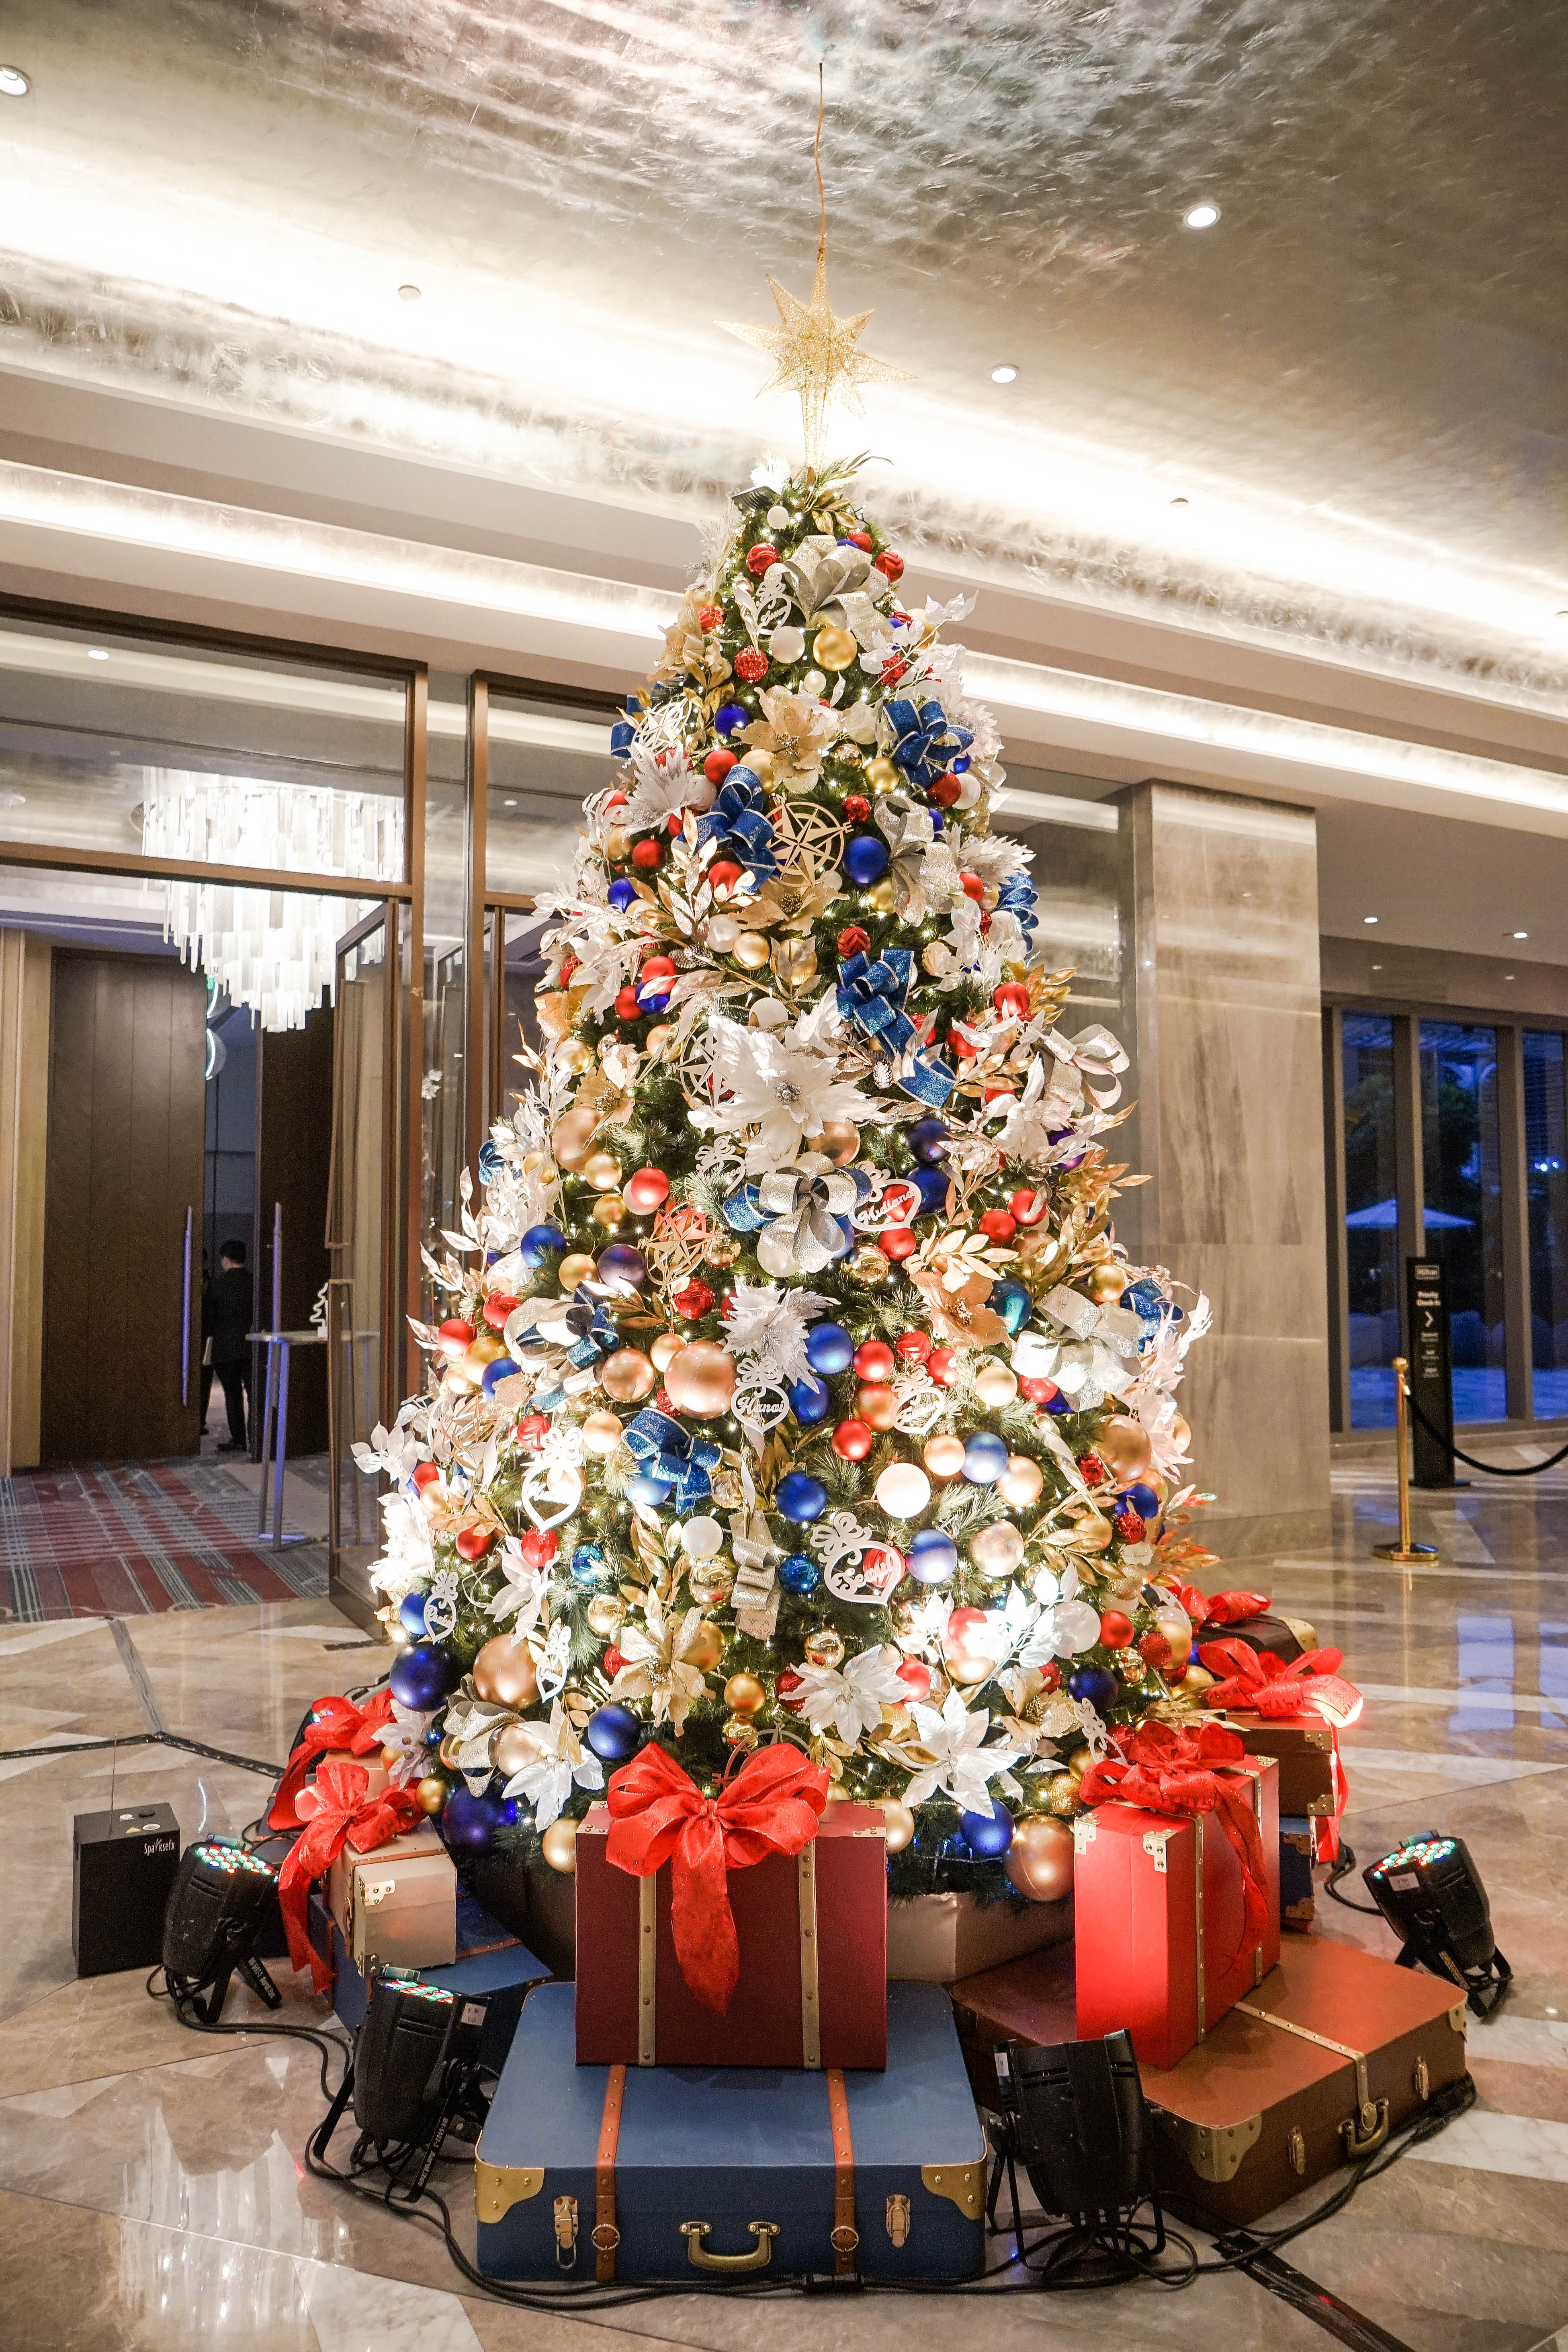 Hilton Manila lights up for the holidays with travelinspired Christmas